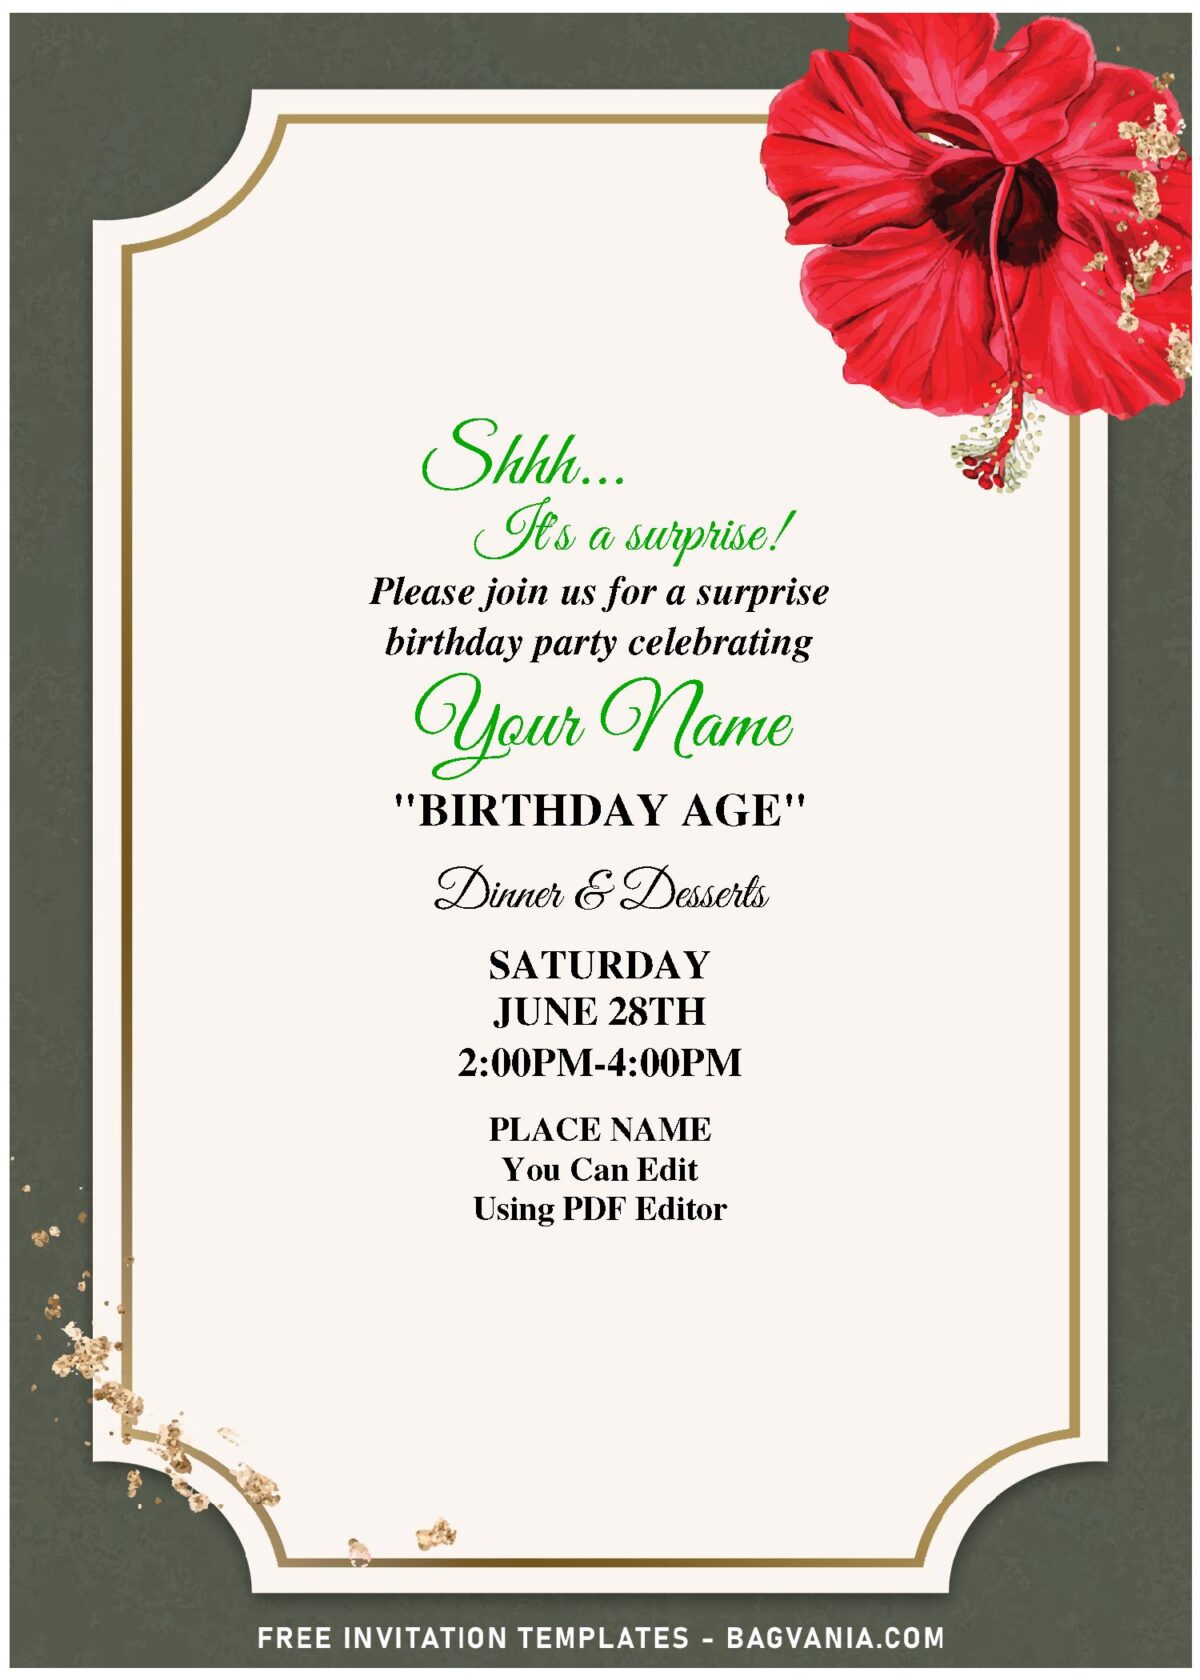 (Free Editable PDF) Lovely Floral Frame Birthday Invitation Templates with Hawaiian Hibiscus flower